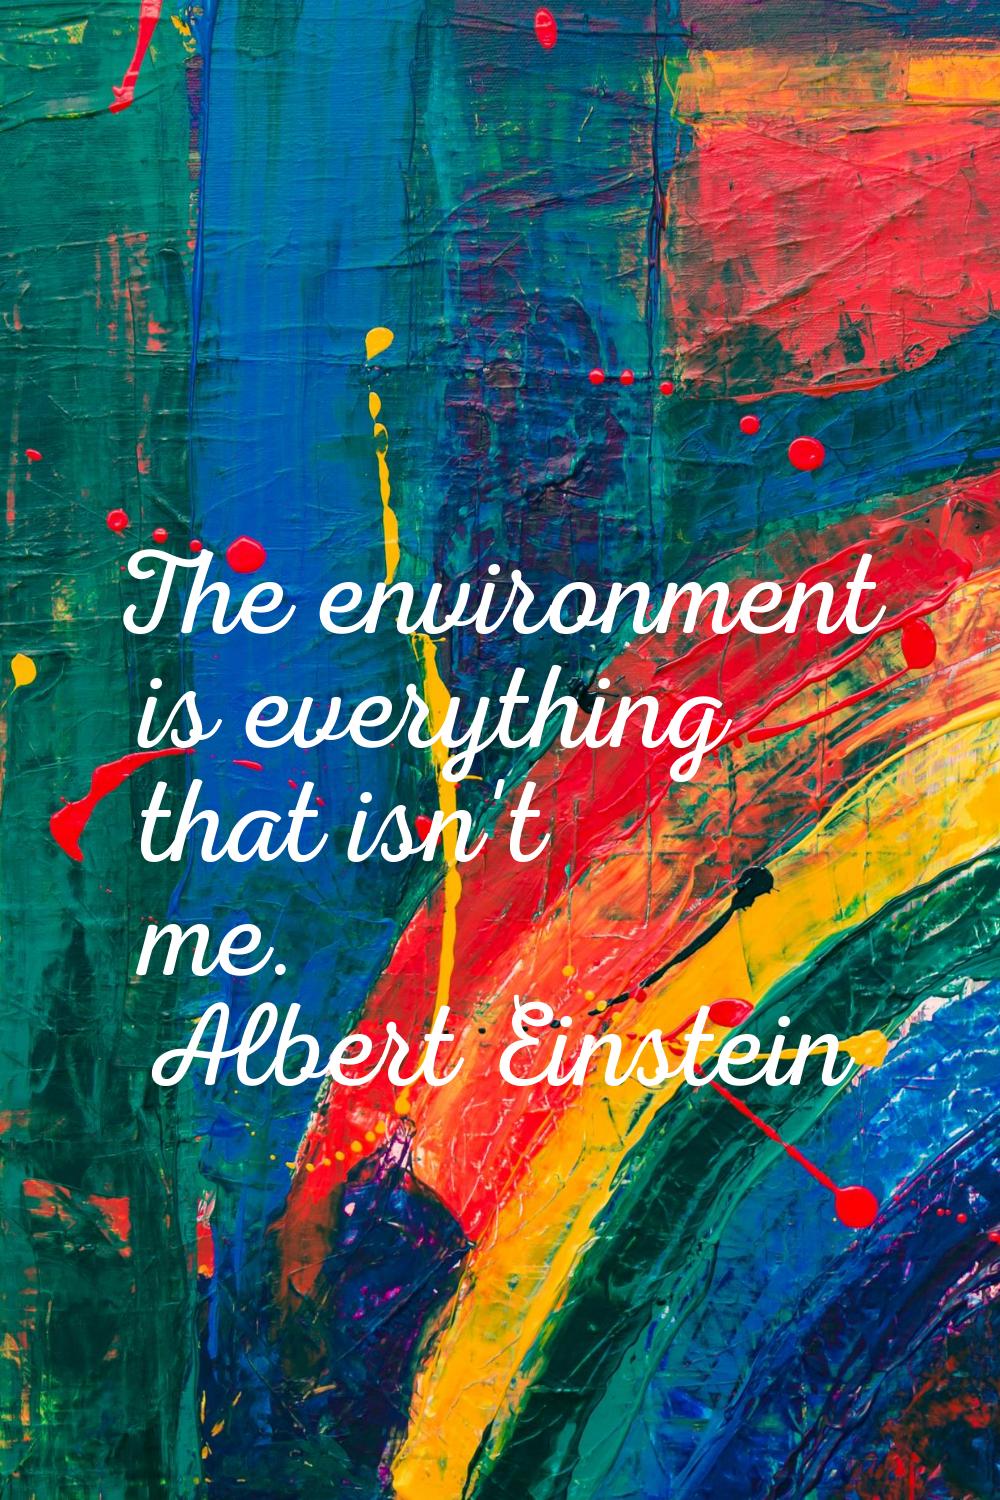 The environment is everything that isn't me.